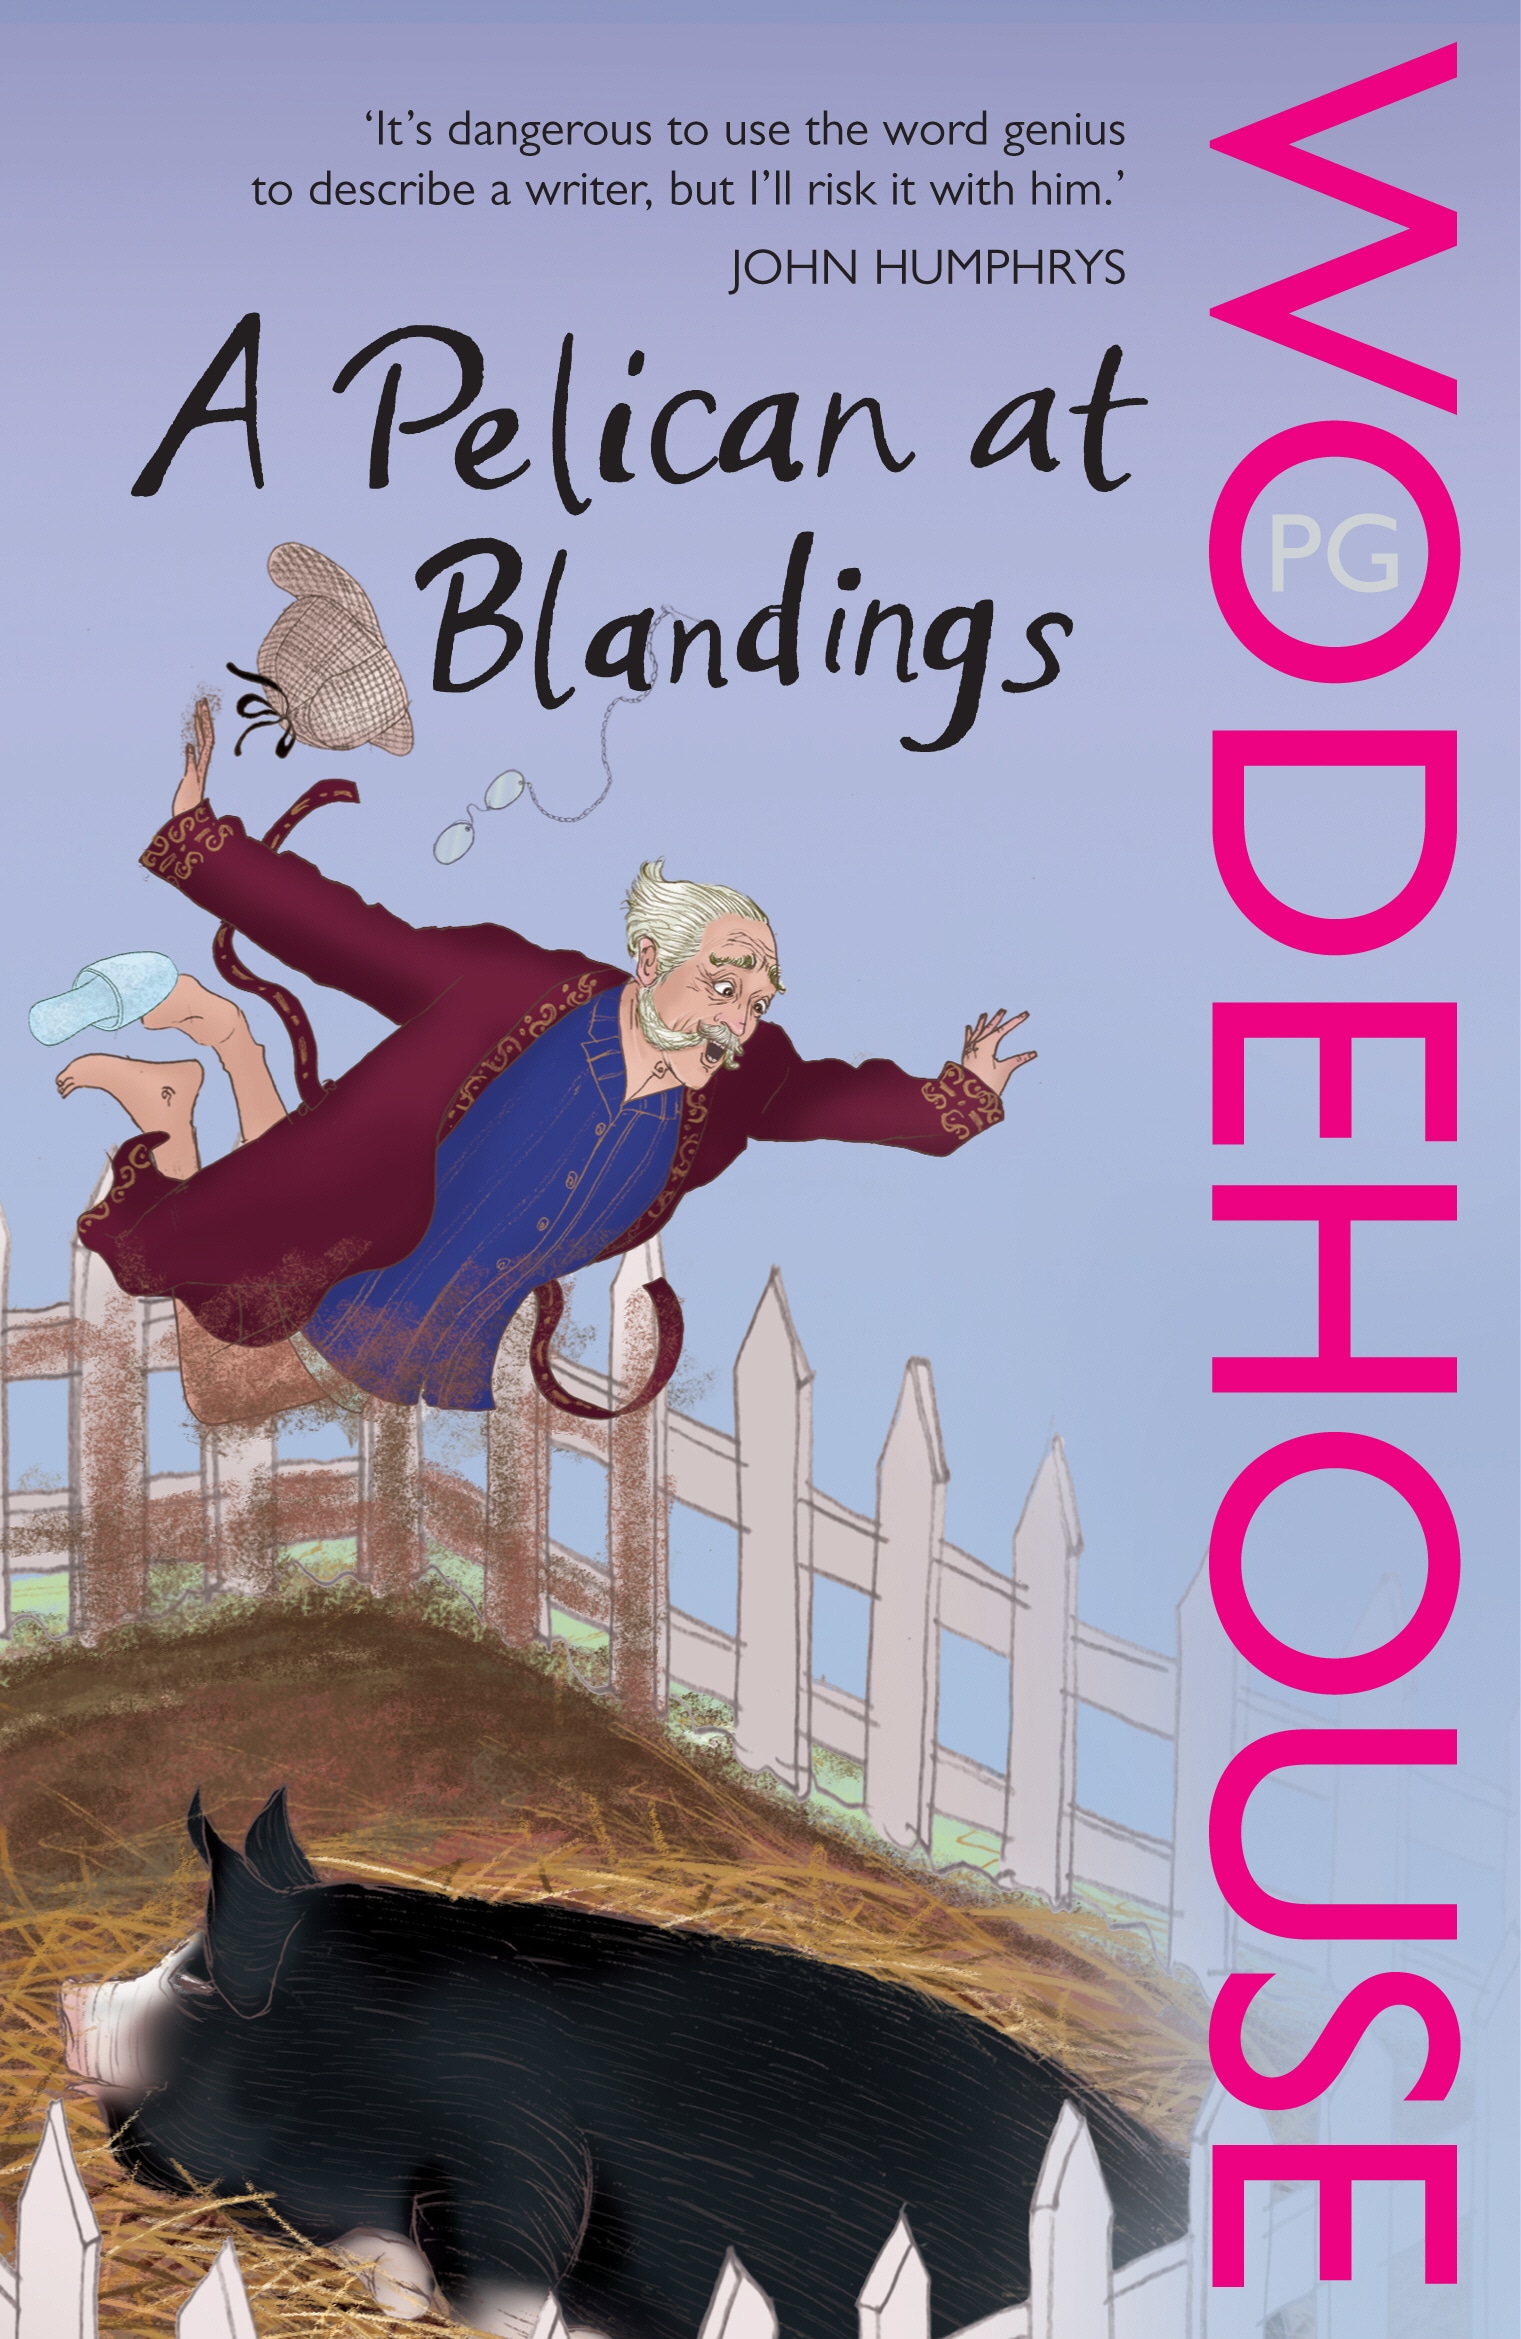 Book “A Pelican at Blandings” by P.G. Wodehouse — August 7, 2008